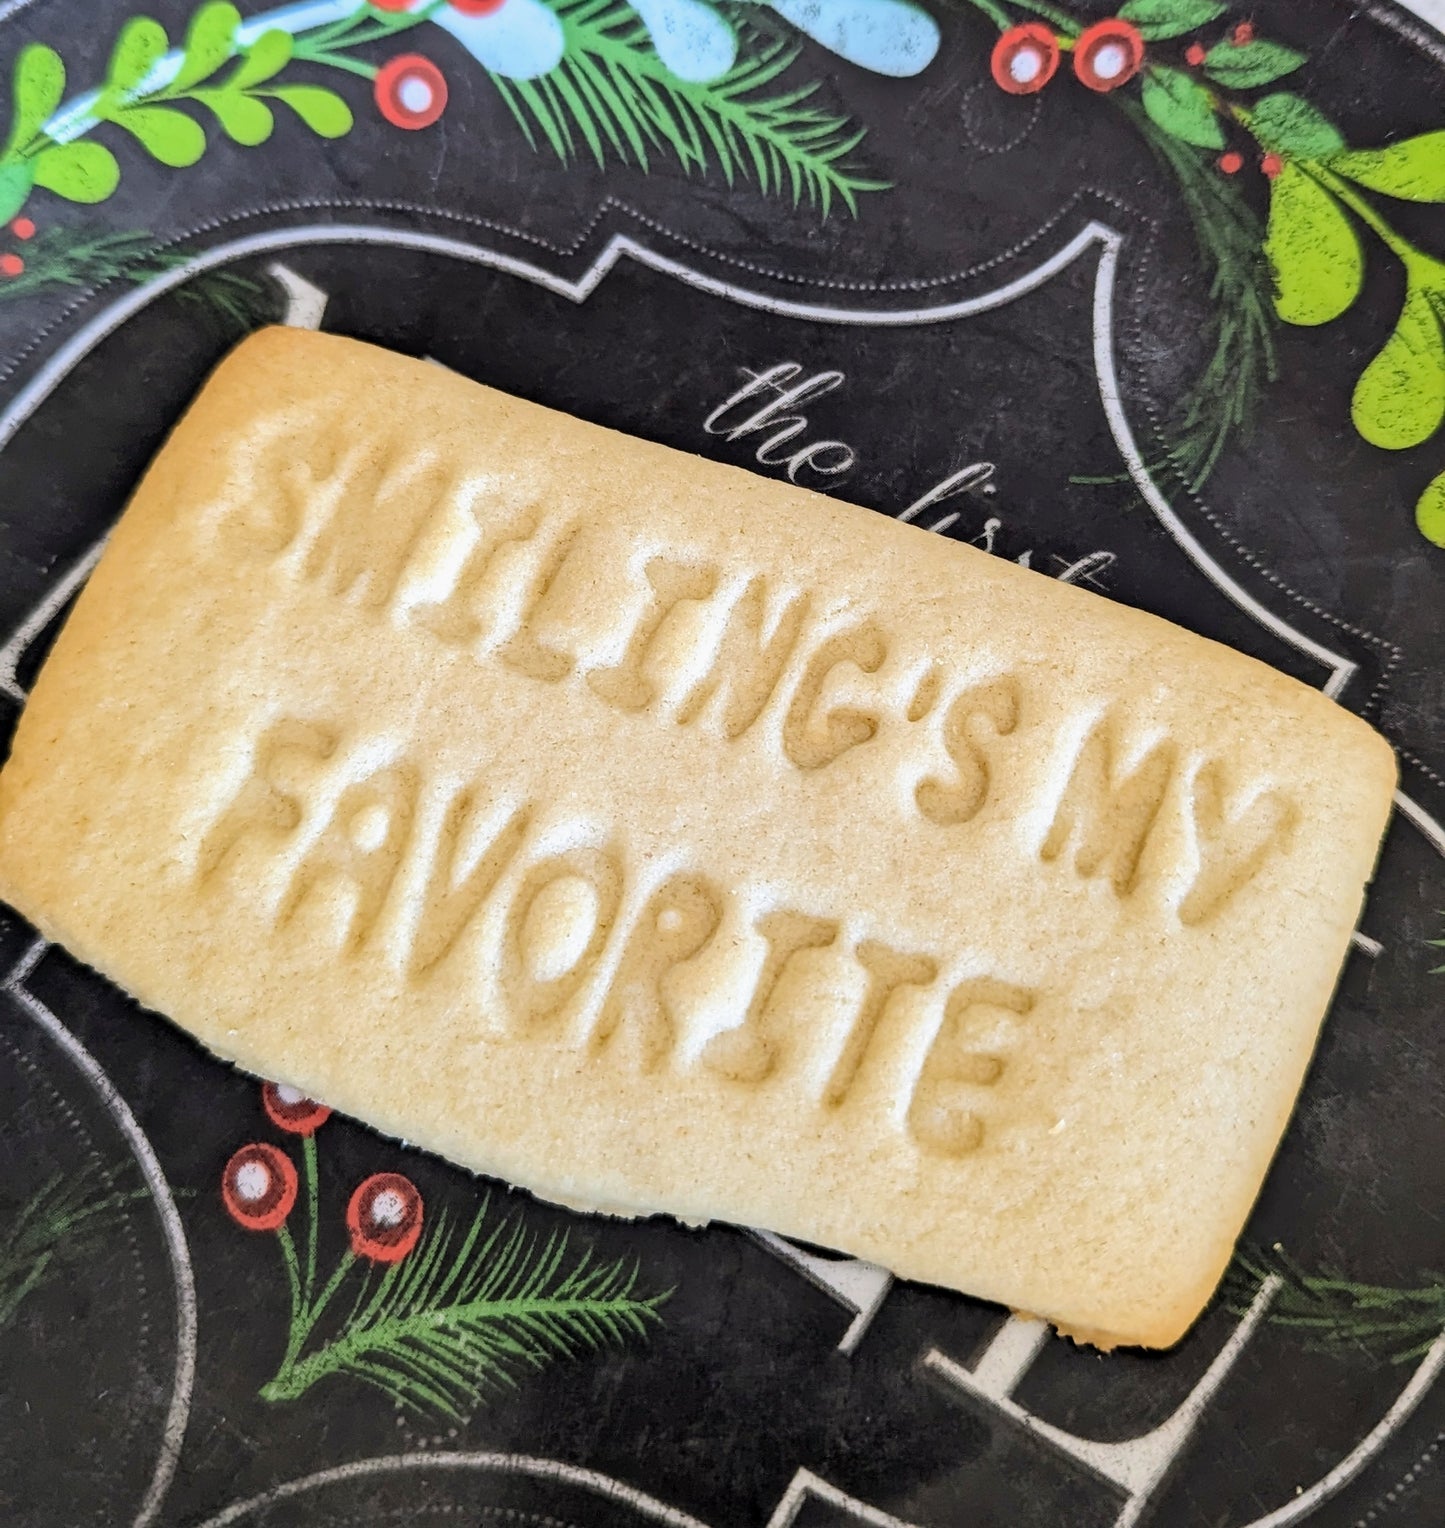 Smiling's my Favorite - Elf Cookie Cutter